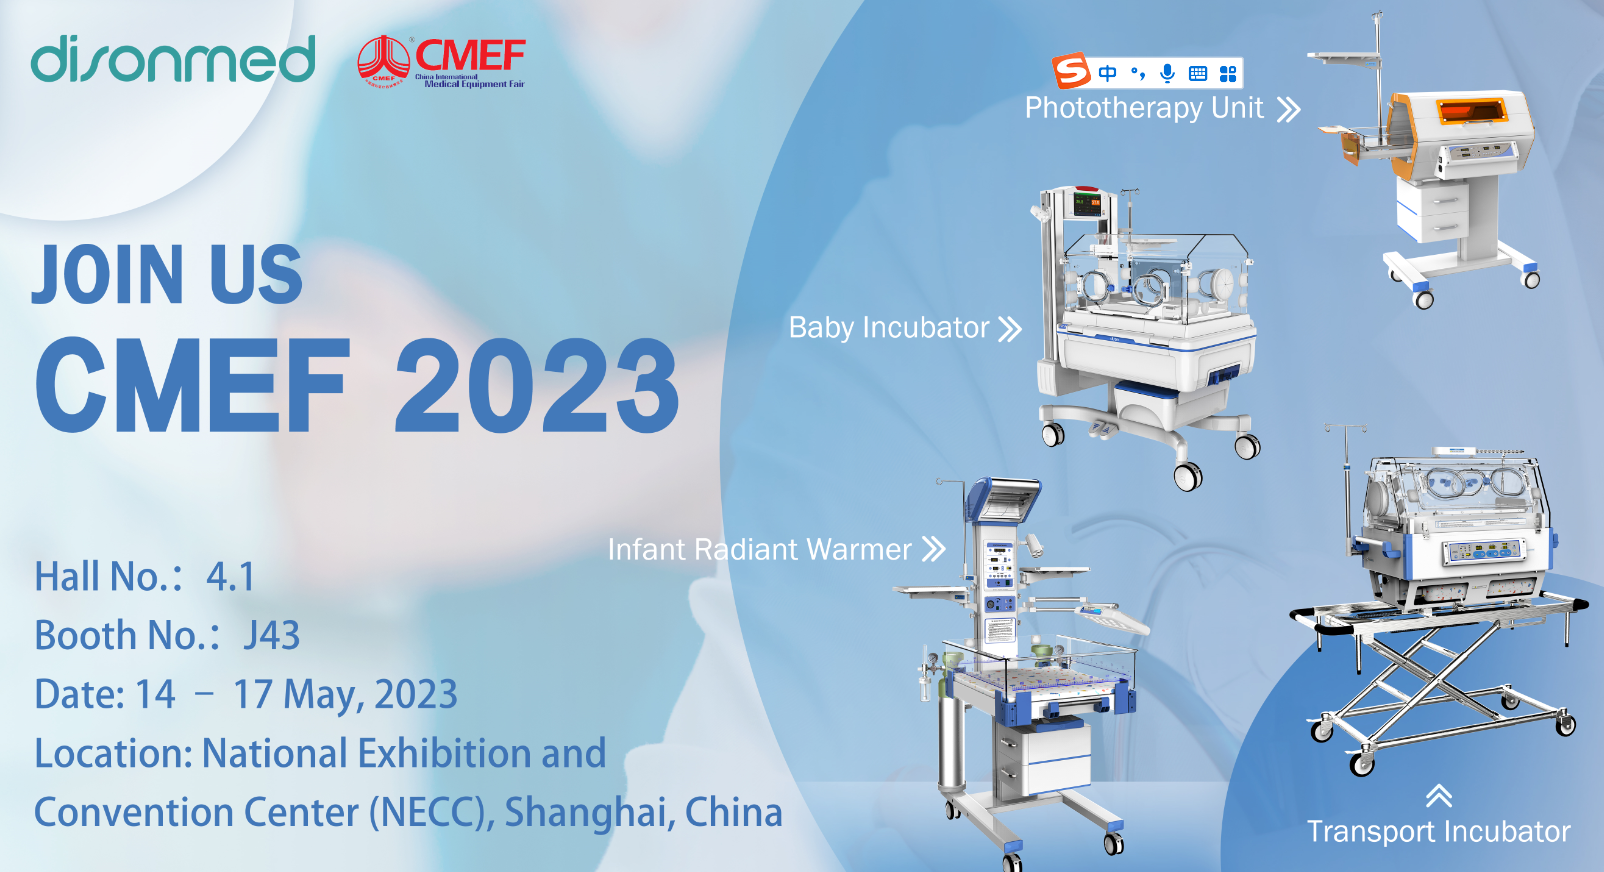 Join Us CMEF 2023 Booth No.：J43 Date: 14 – 17 May, 2023